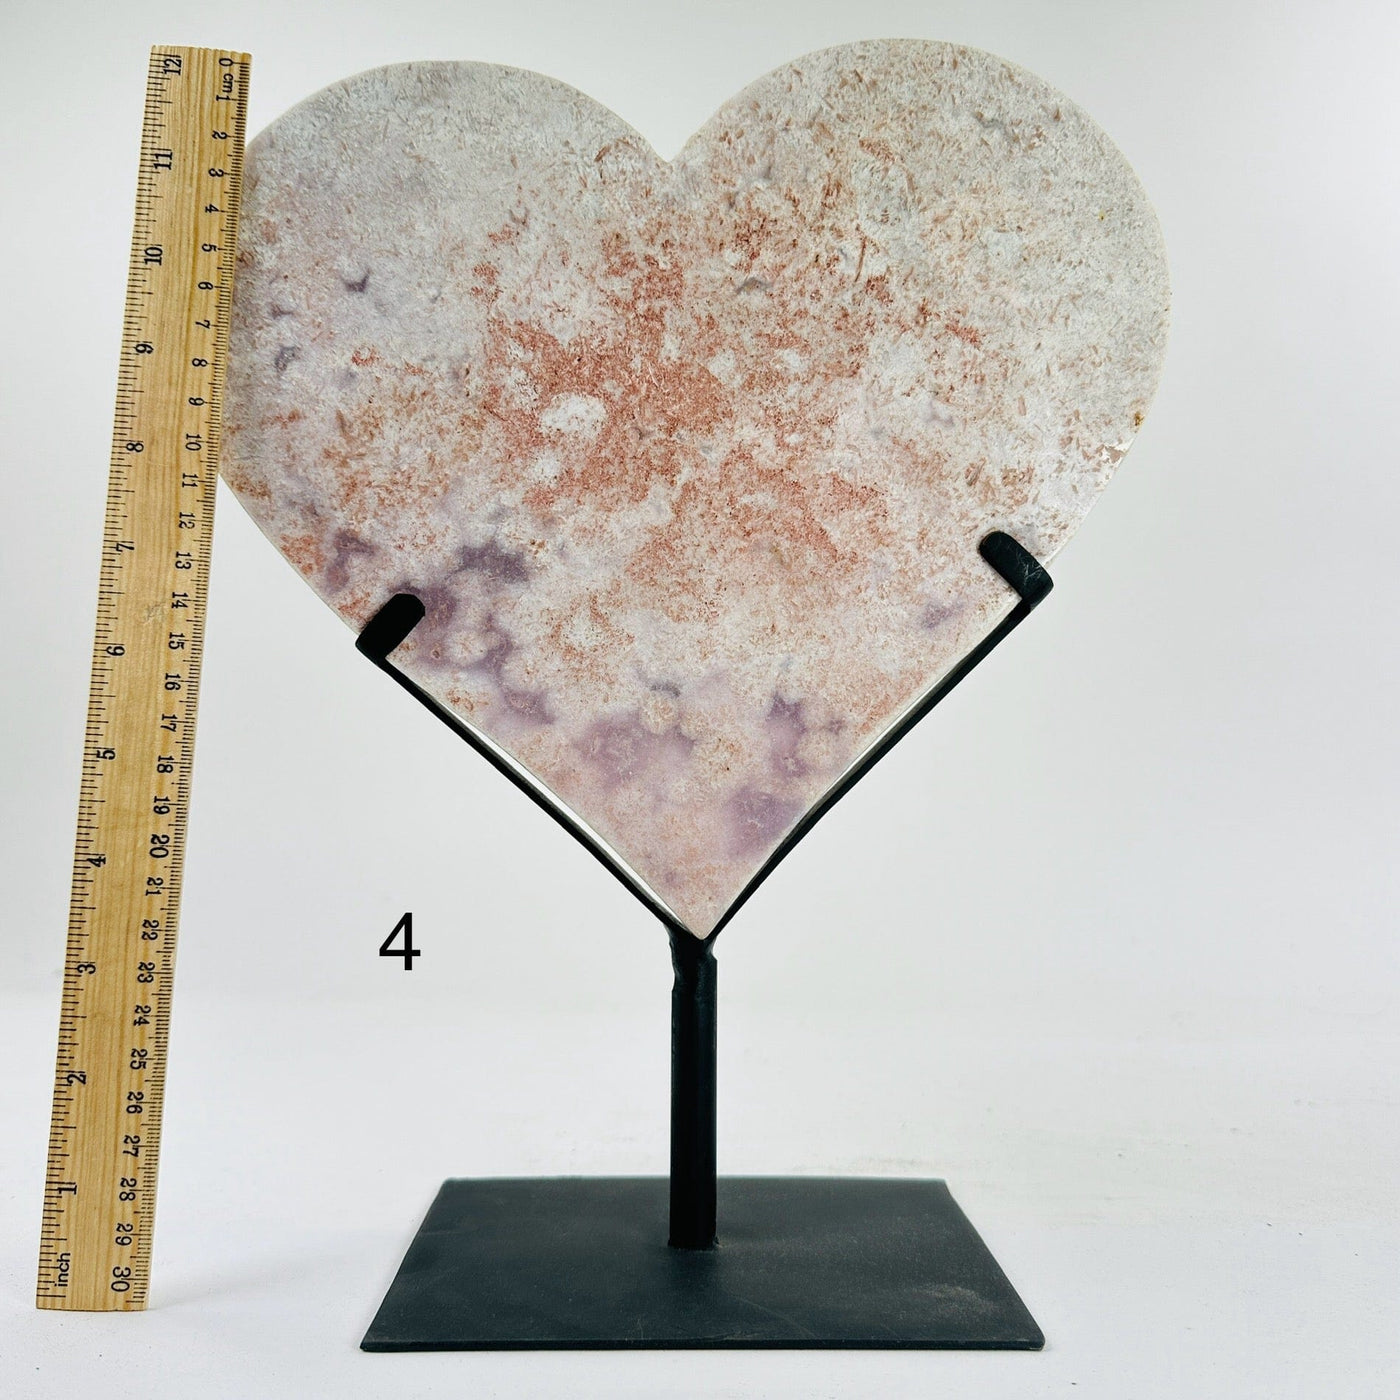 pink amethyst heart on metal stand next to a ruler for size reference